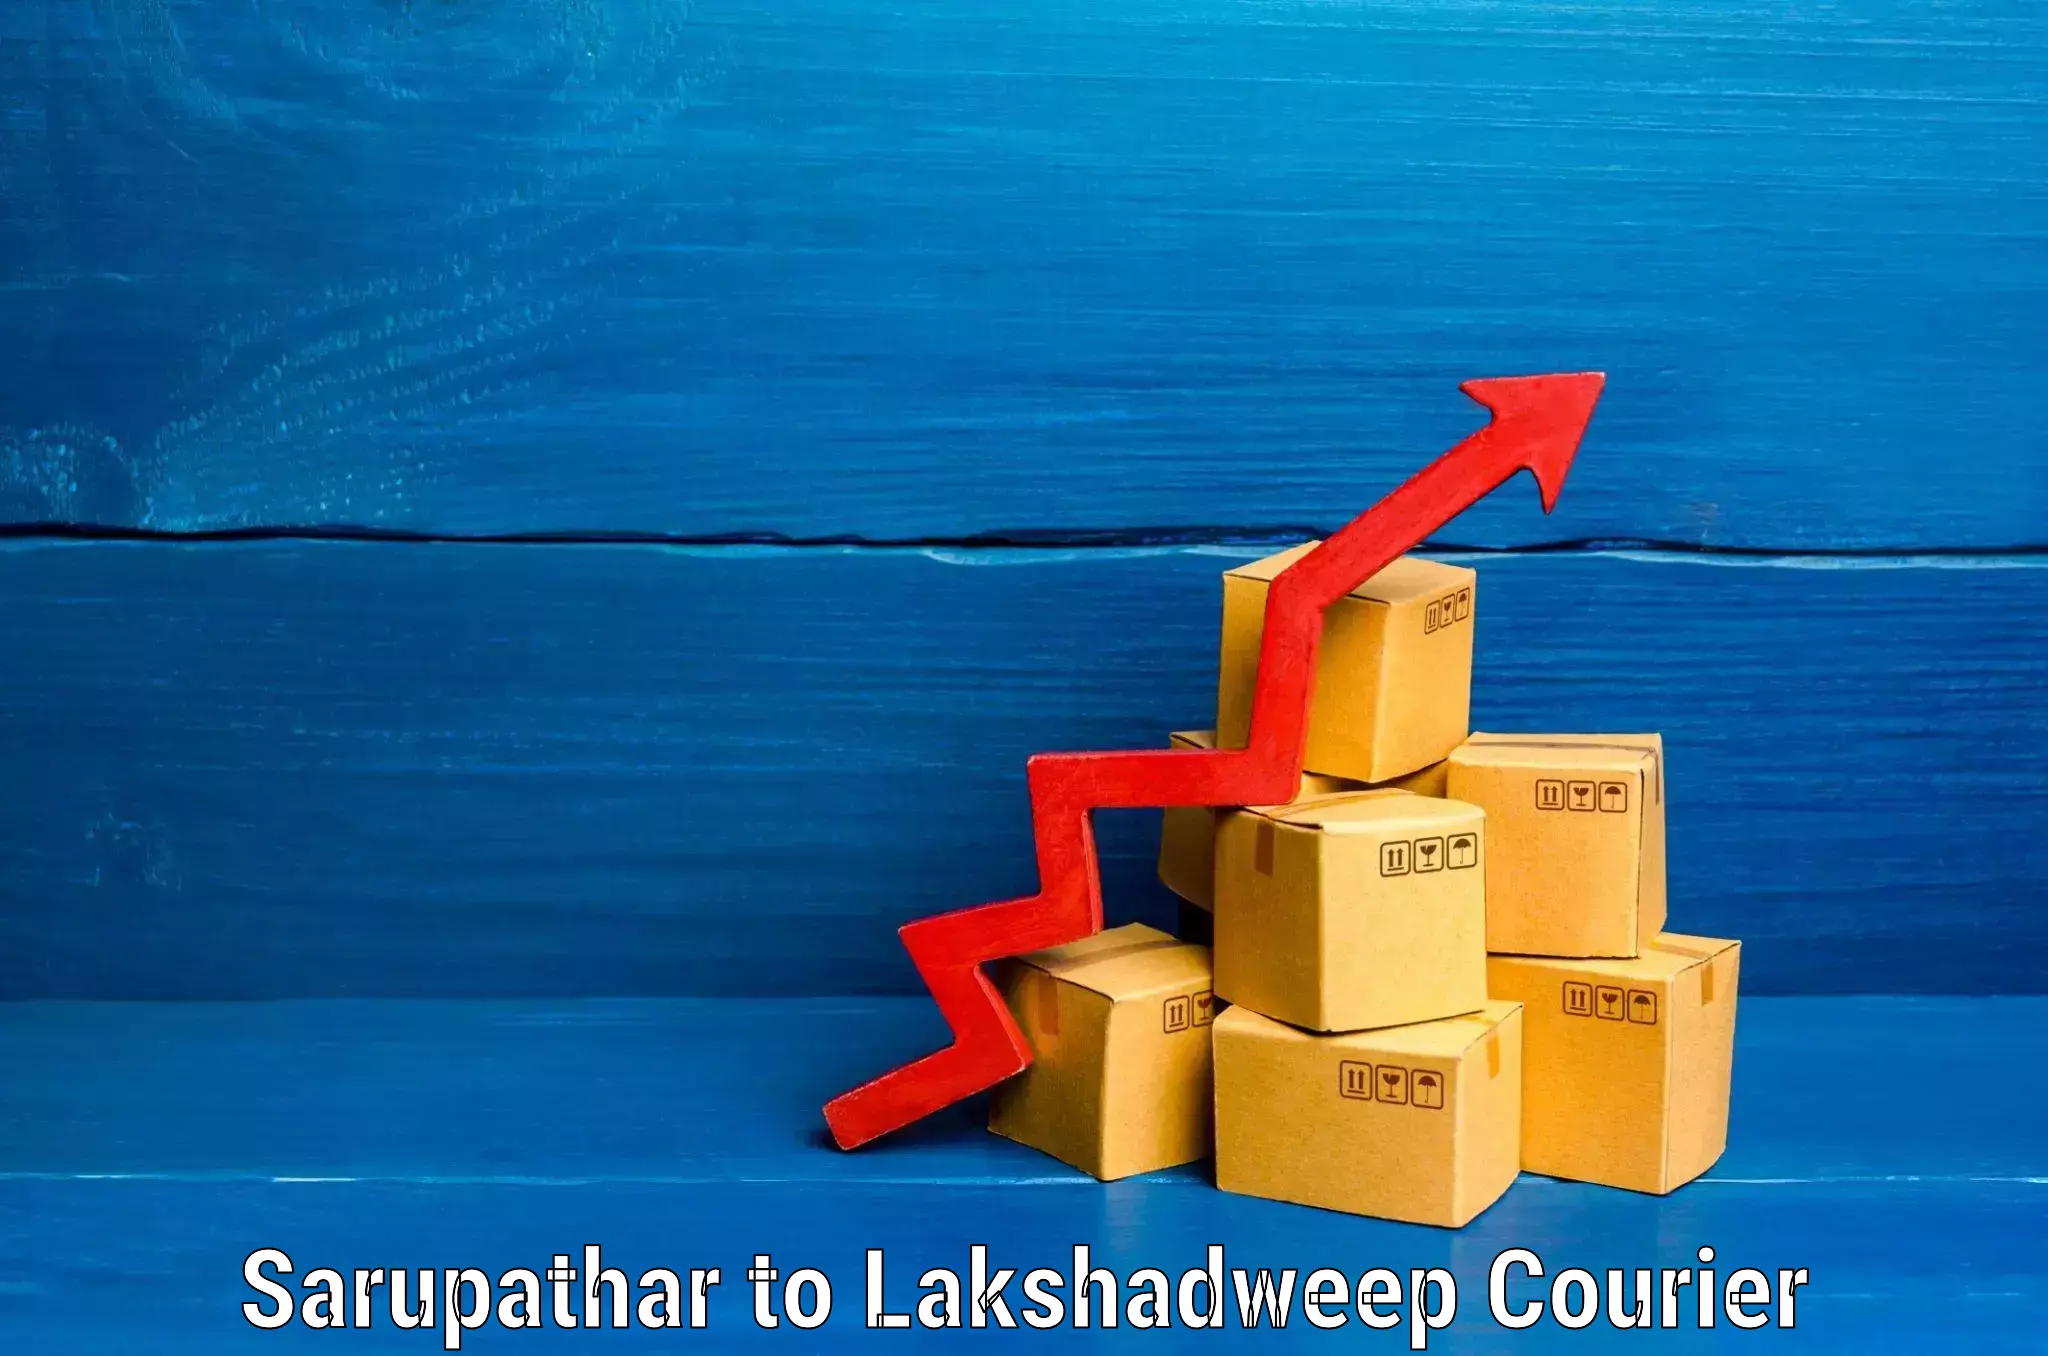 Luggage delivery providers Sarupathar to Lakshadweep